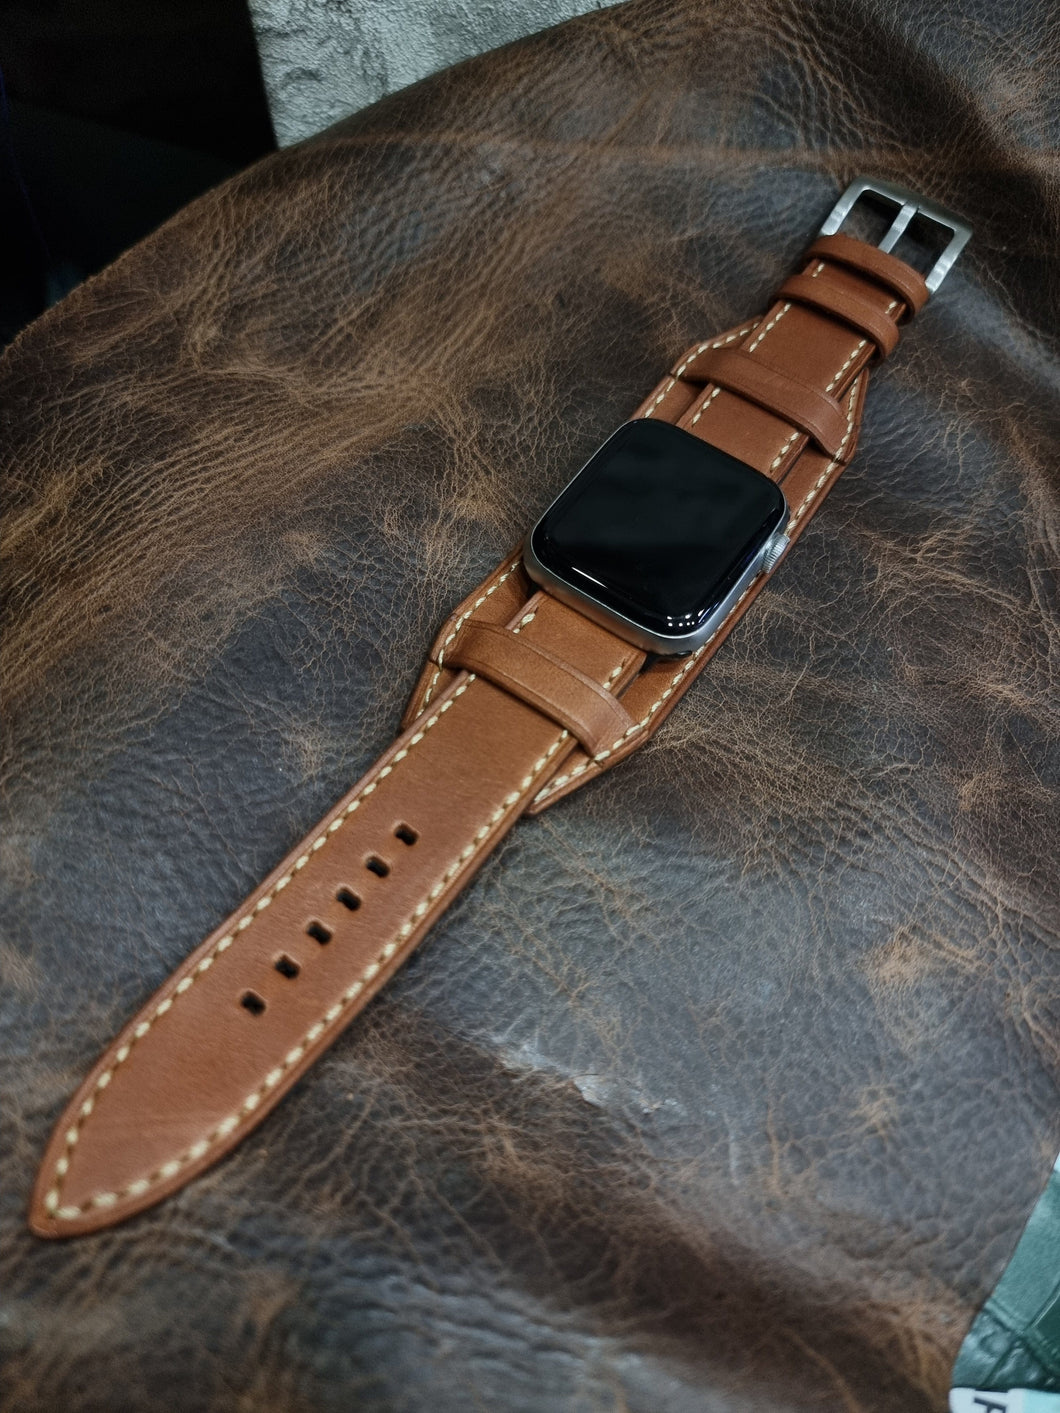 Indianleathercraft Watch Bands Series 4 / 42mm / Cognac Apple watch cuff leather strap